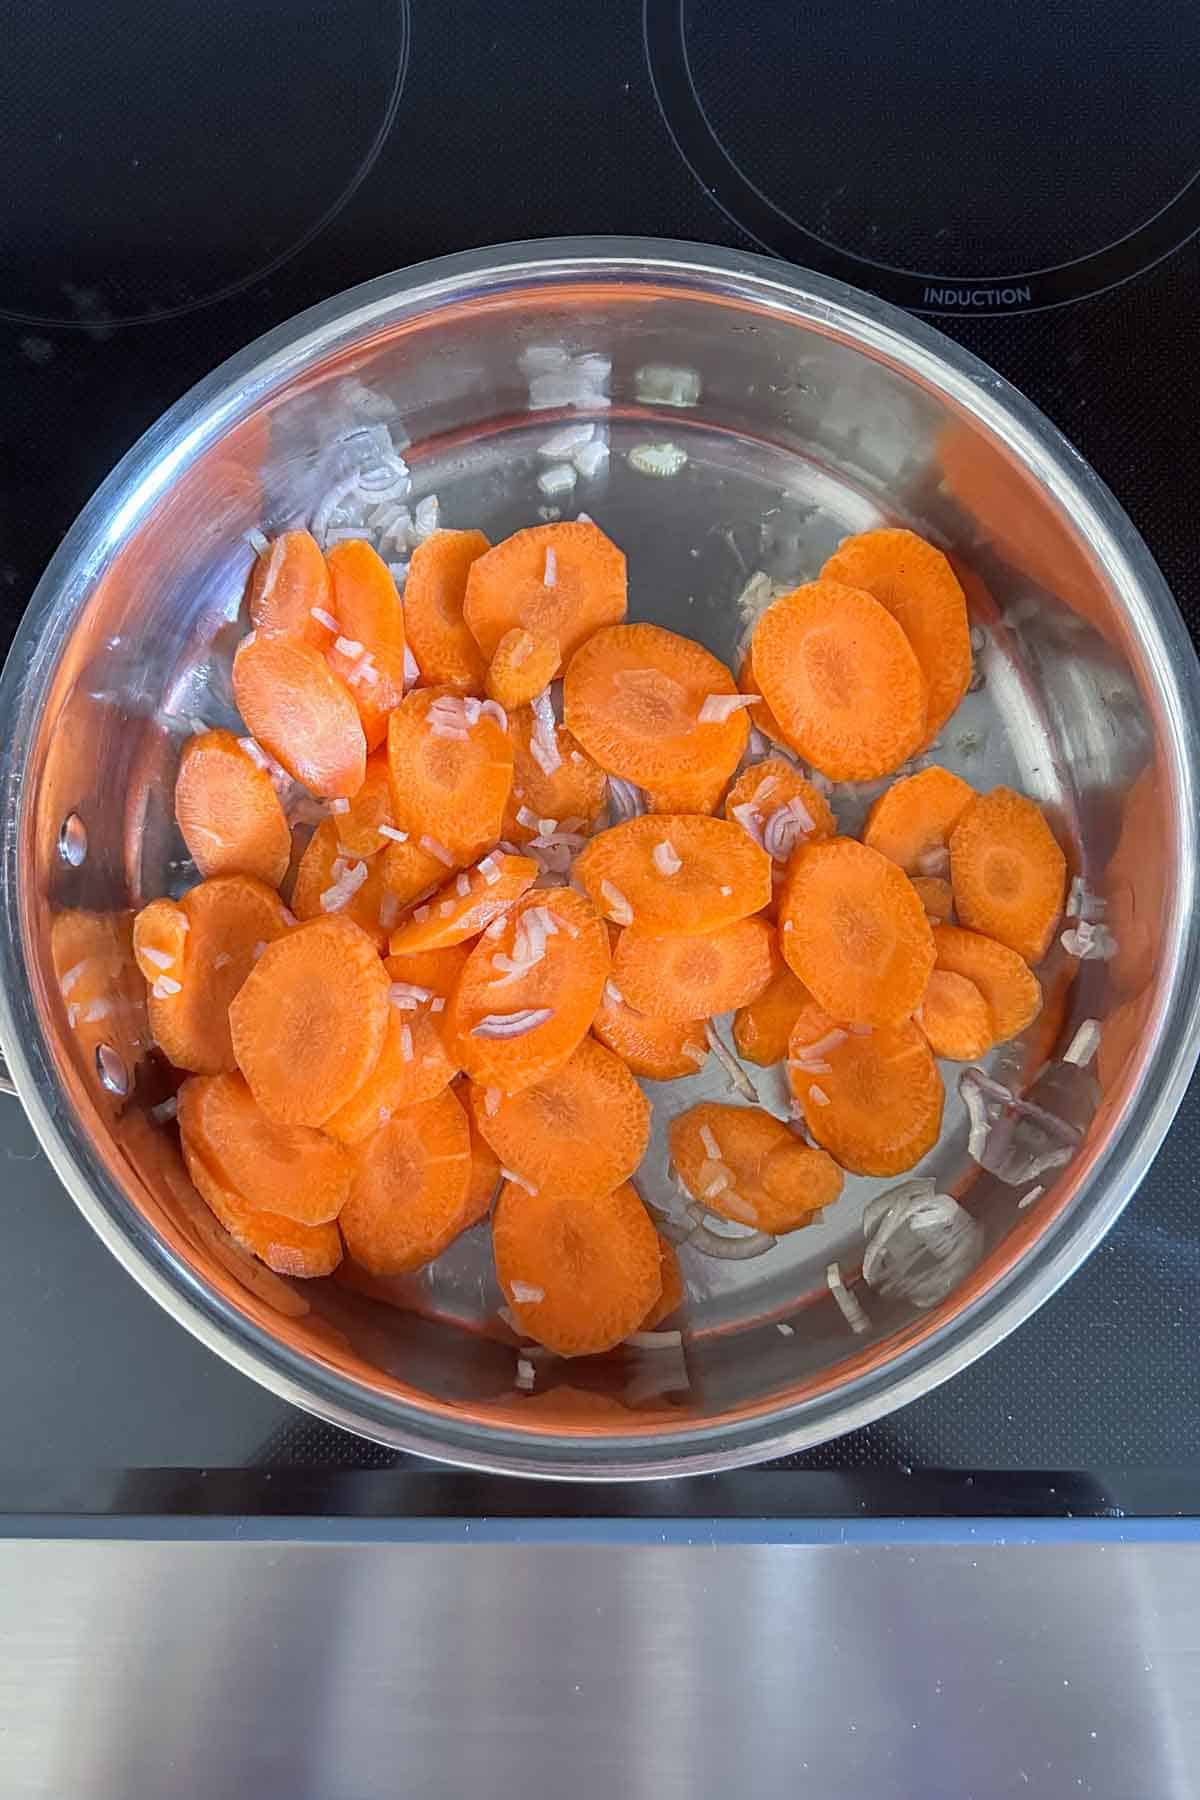 Sliced carrots in a stainless steel bowl on an induction stove top.